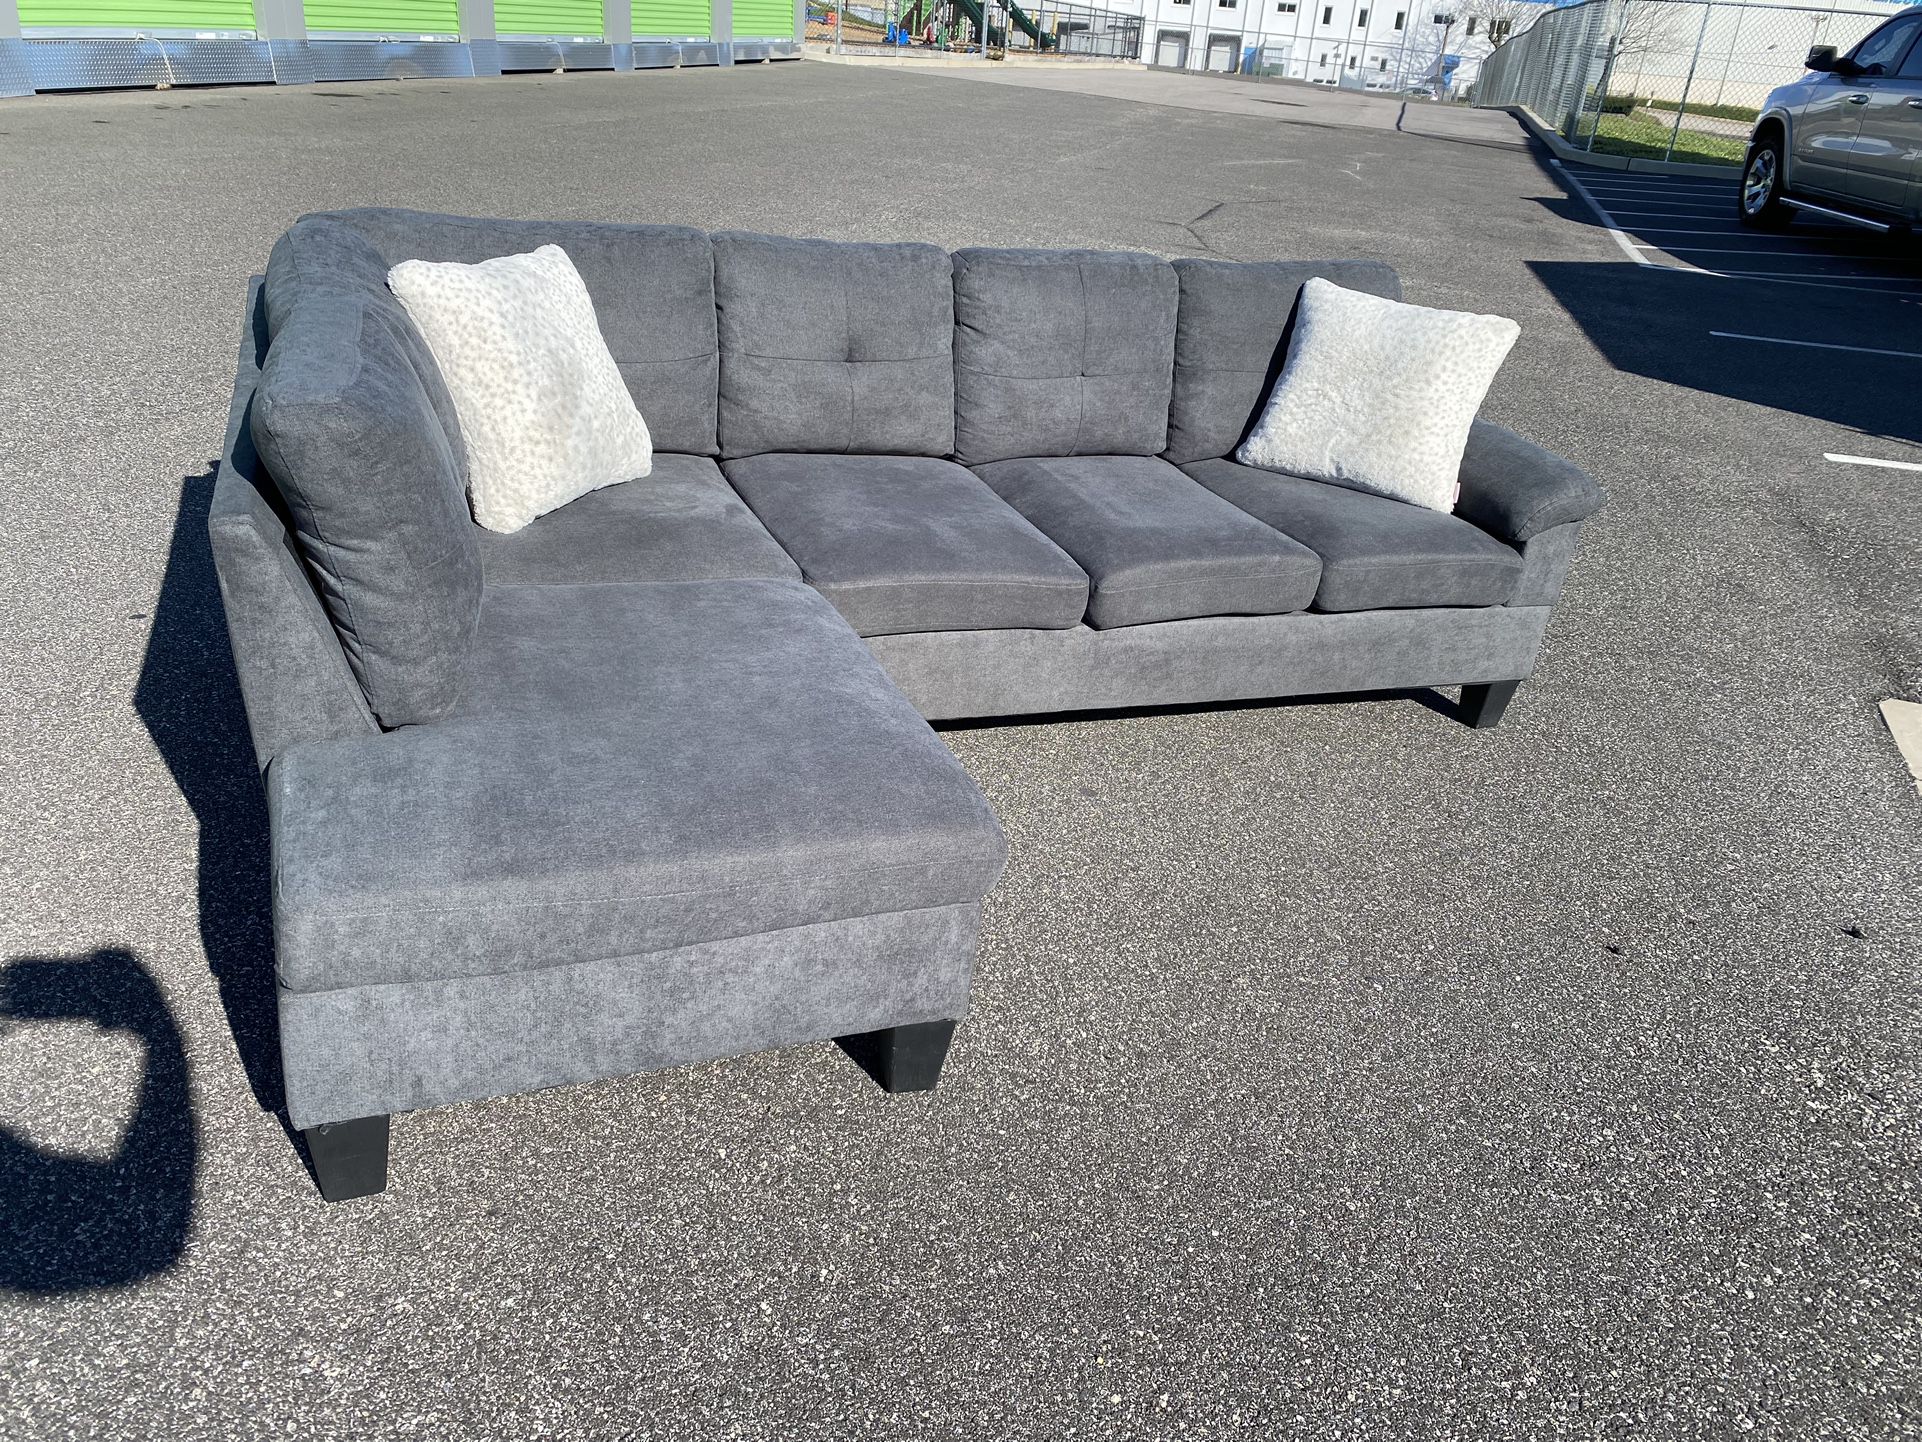 FREE DELIVERY AND INSTALLATION - Partner Furniture Polyester Fabric Gray Sectional (Look my Profile)